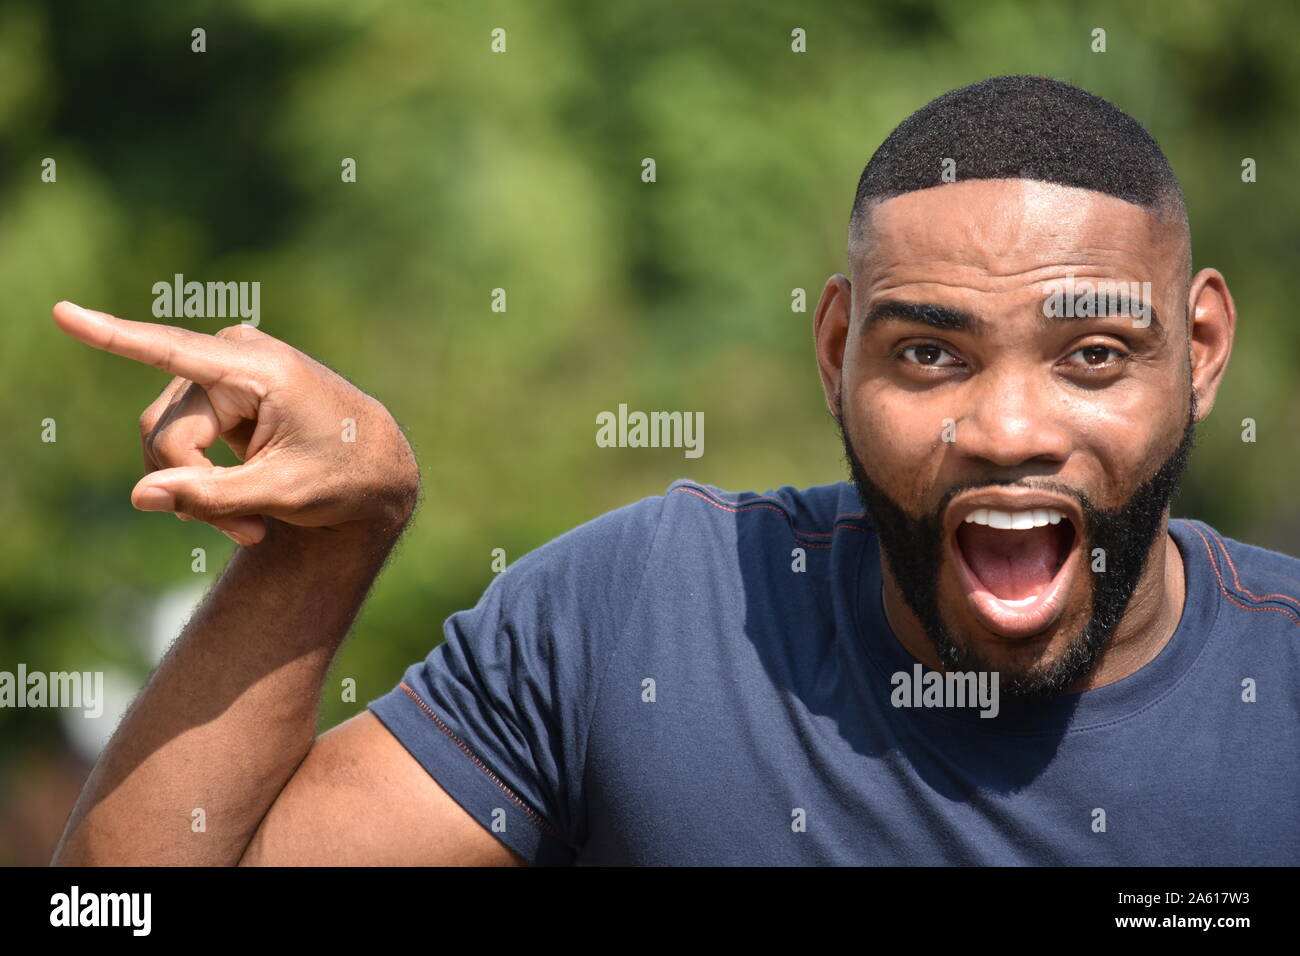 Startled Black Person Stock Photo